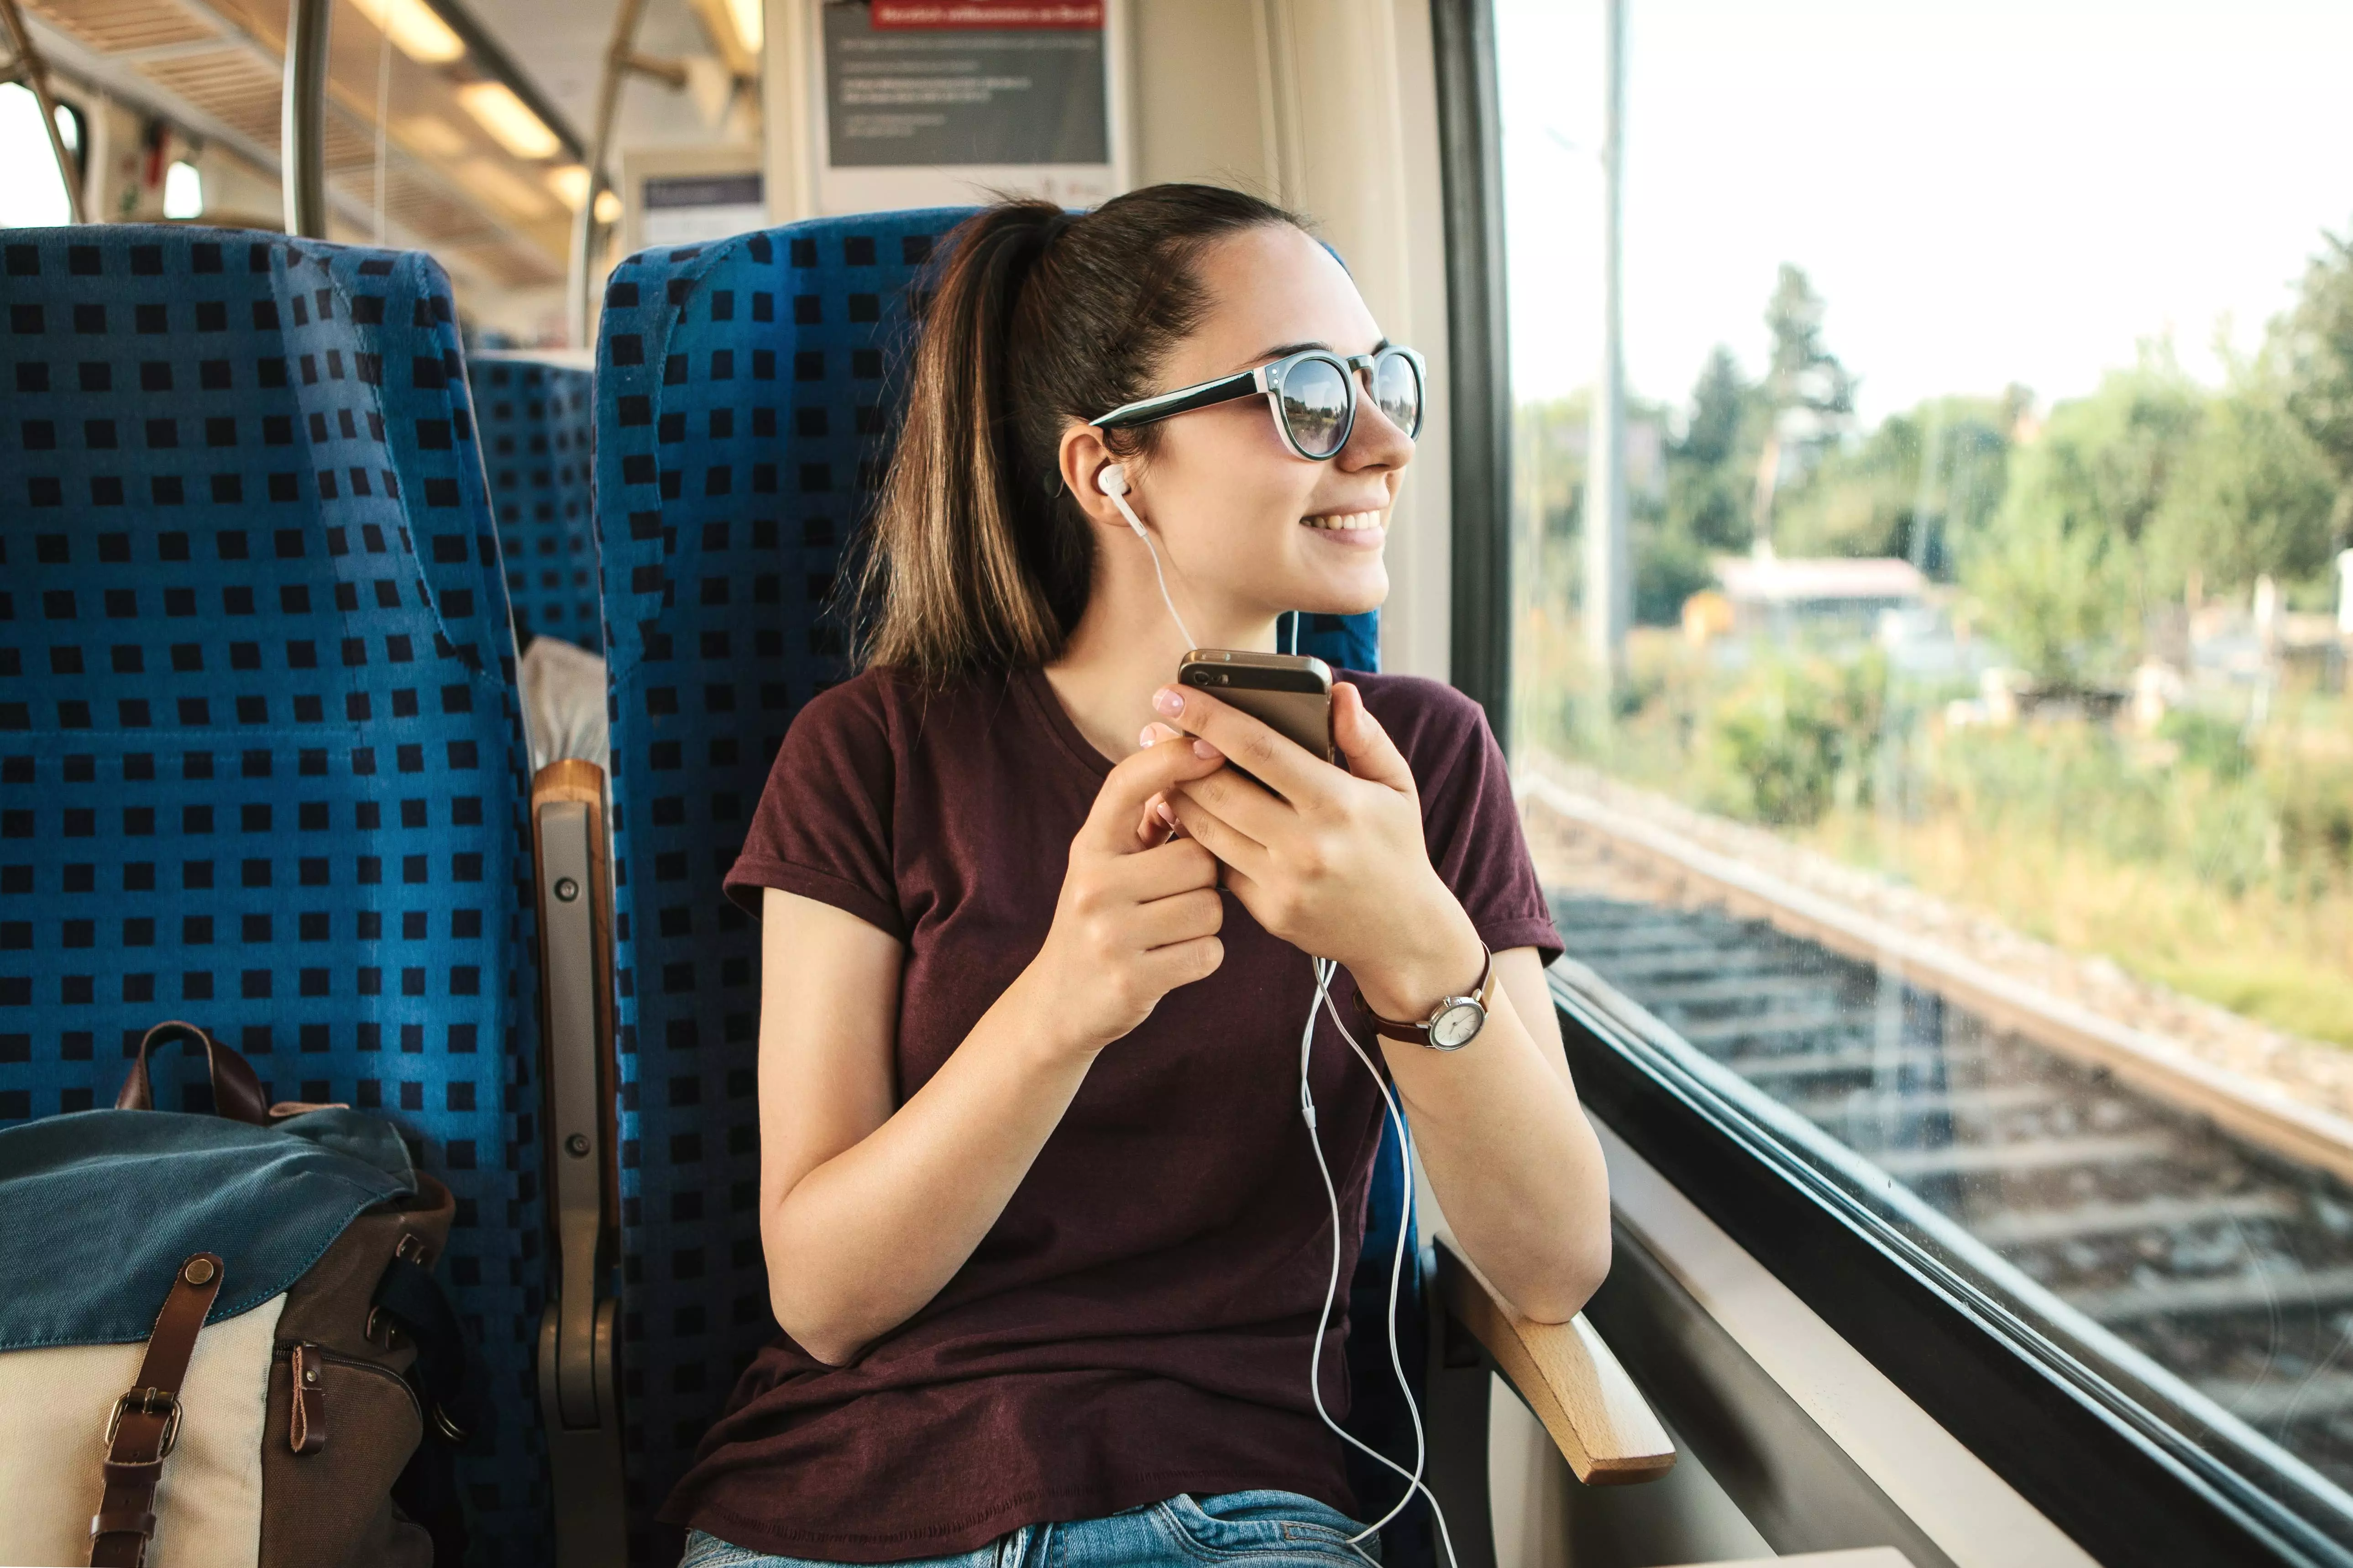 A young woman listens to music while traveling in a train.